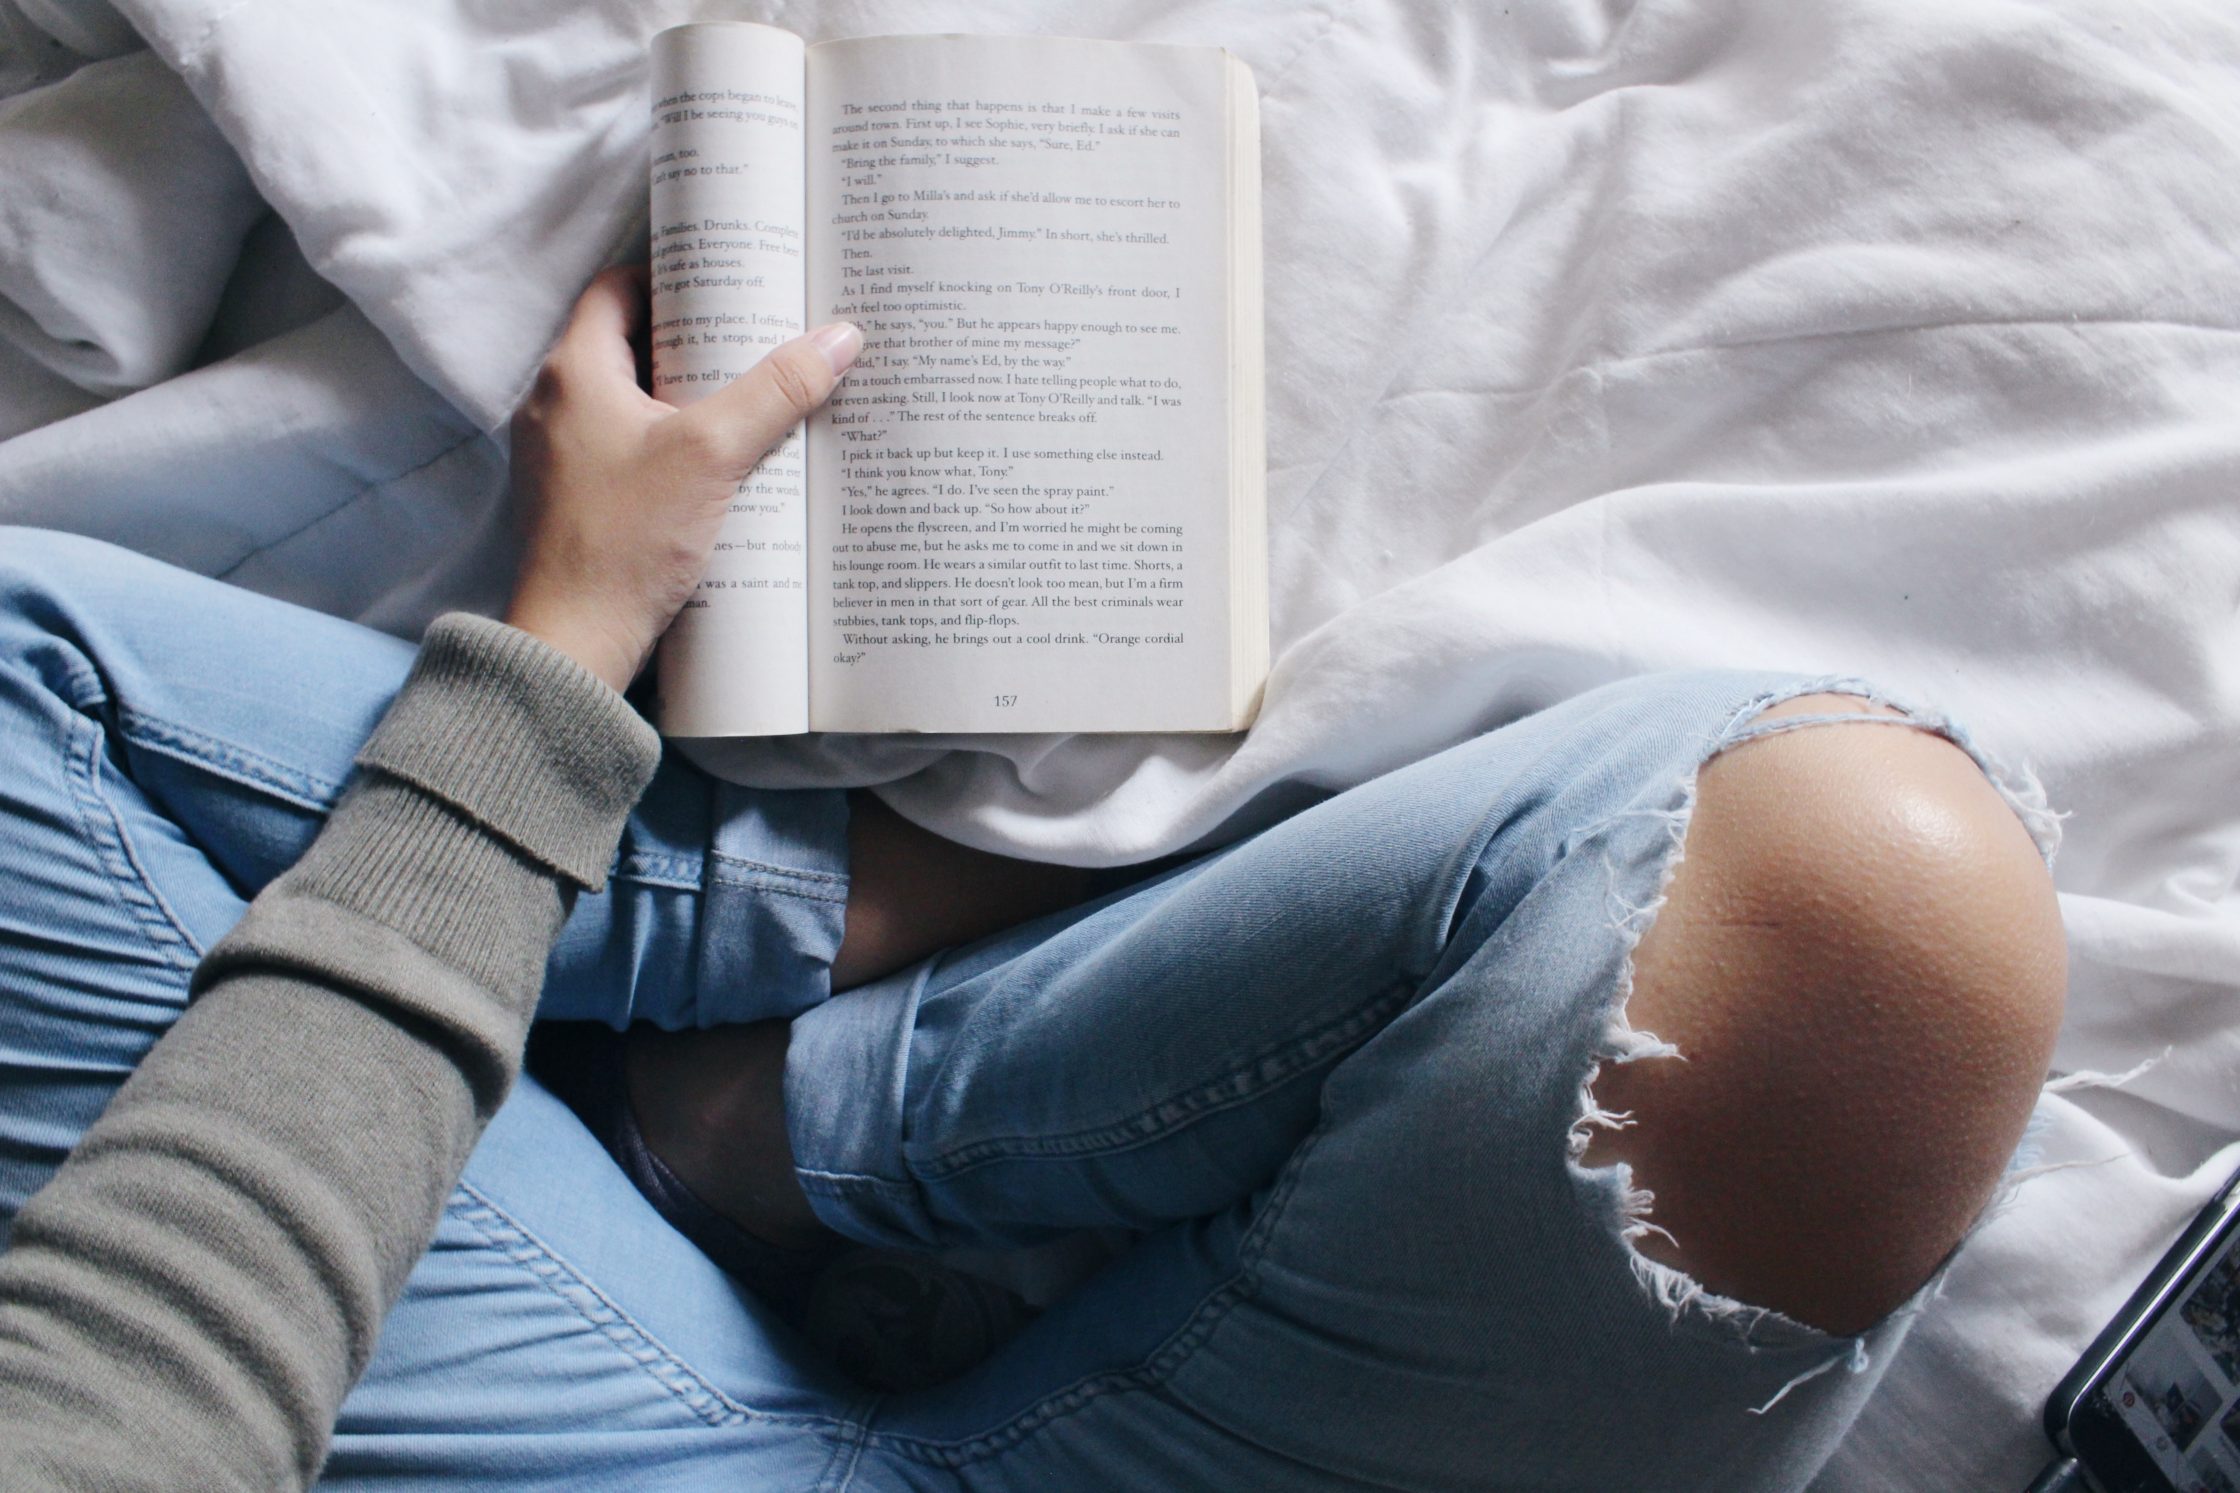 benefits of reading, woman sitting on bed reading from open book